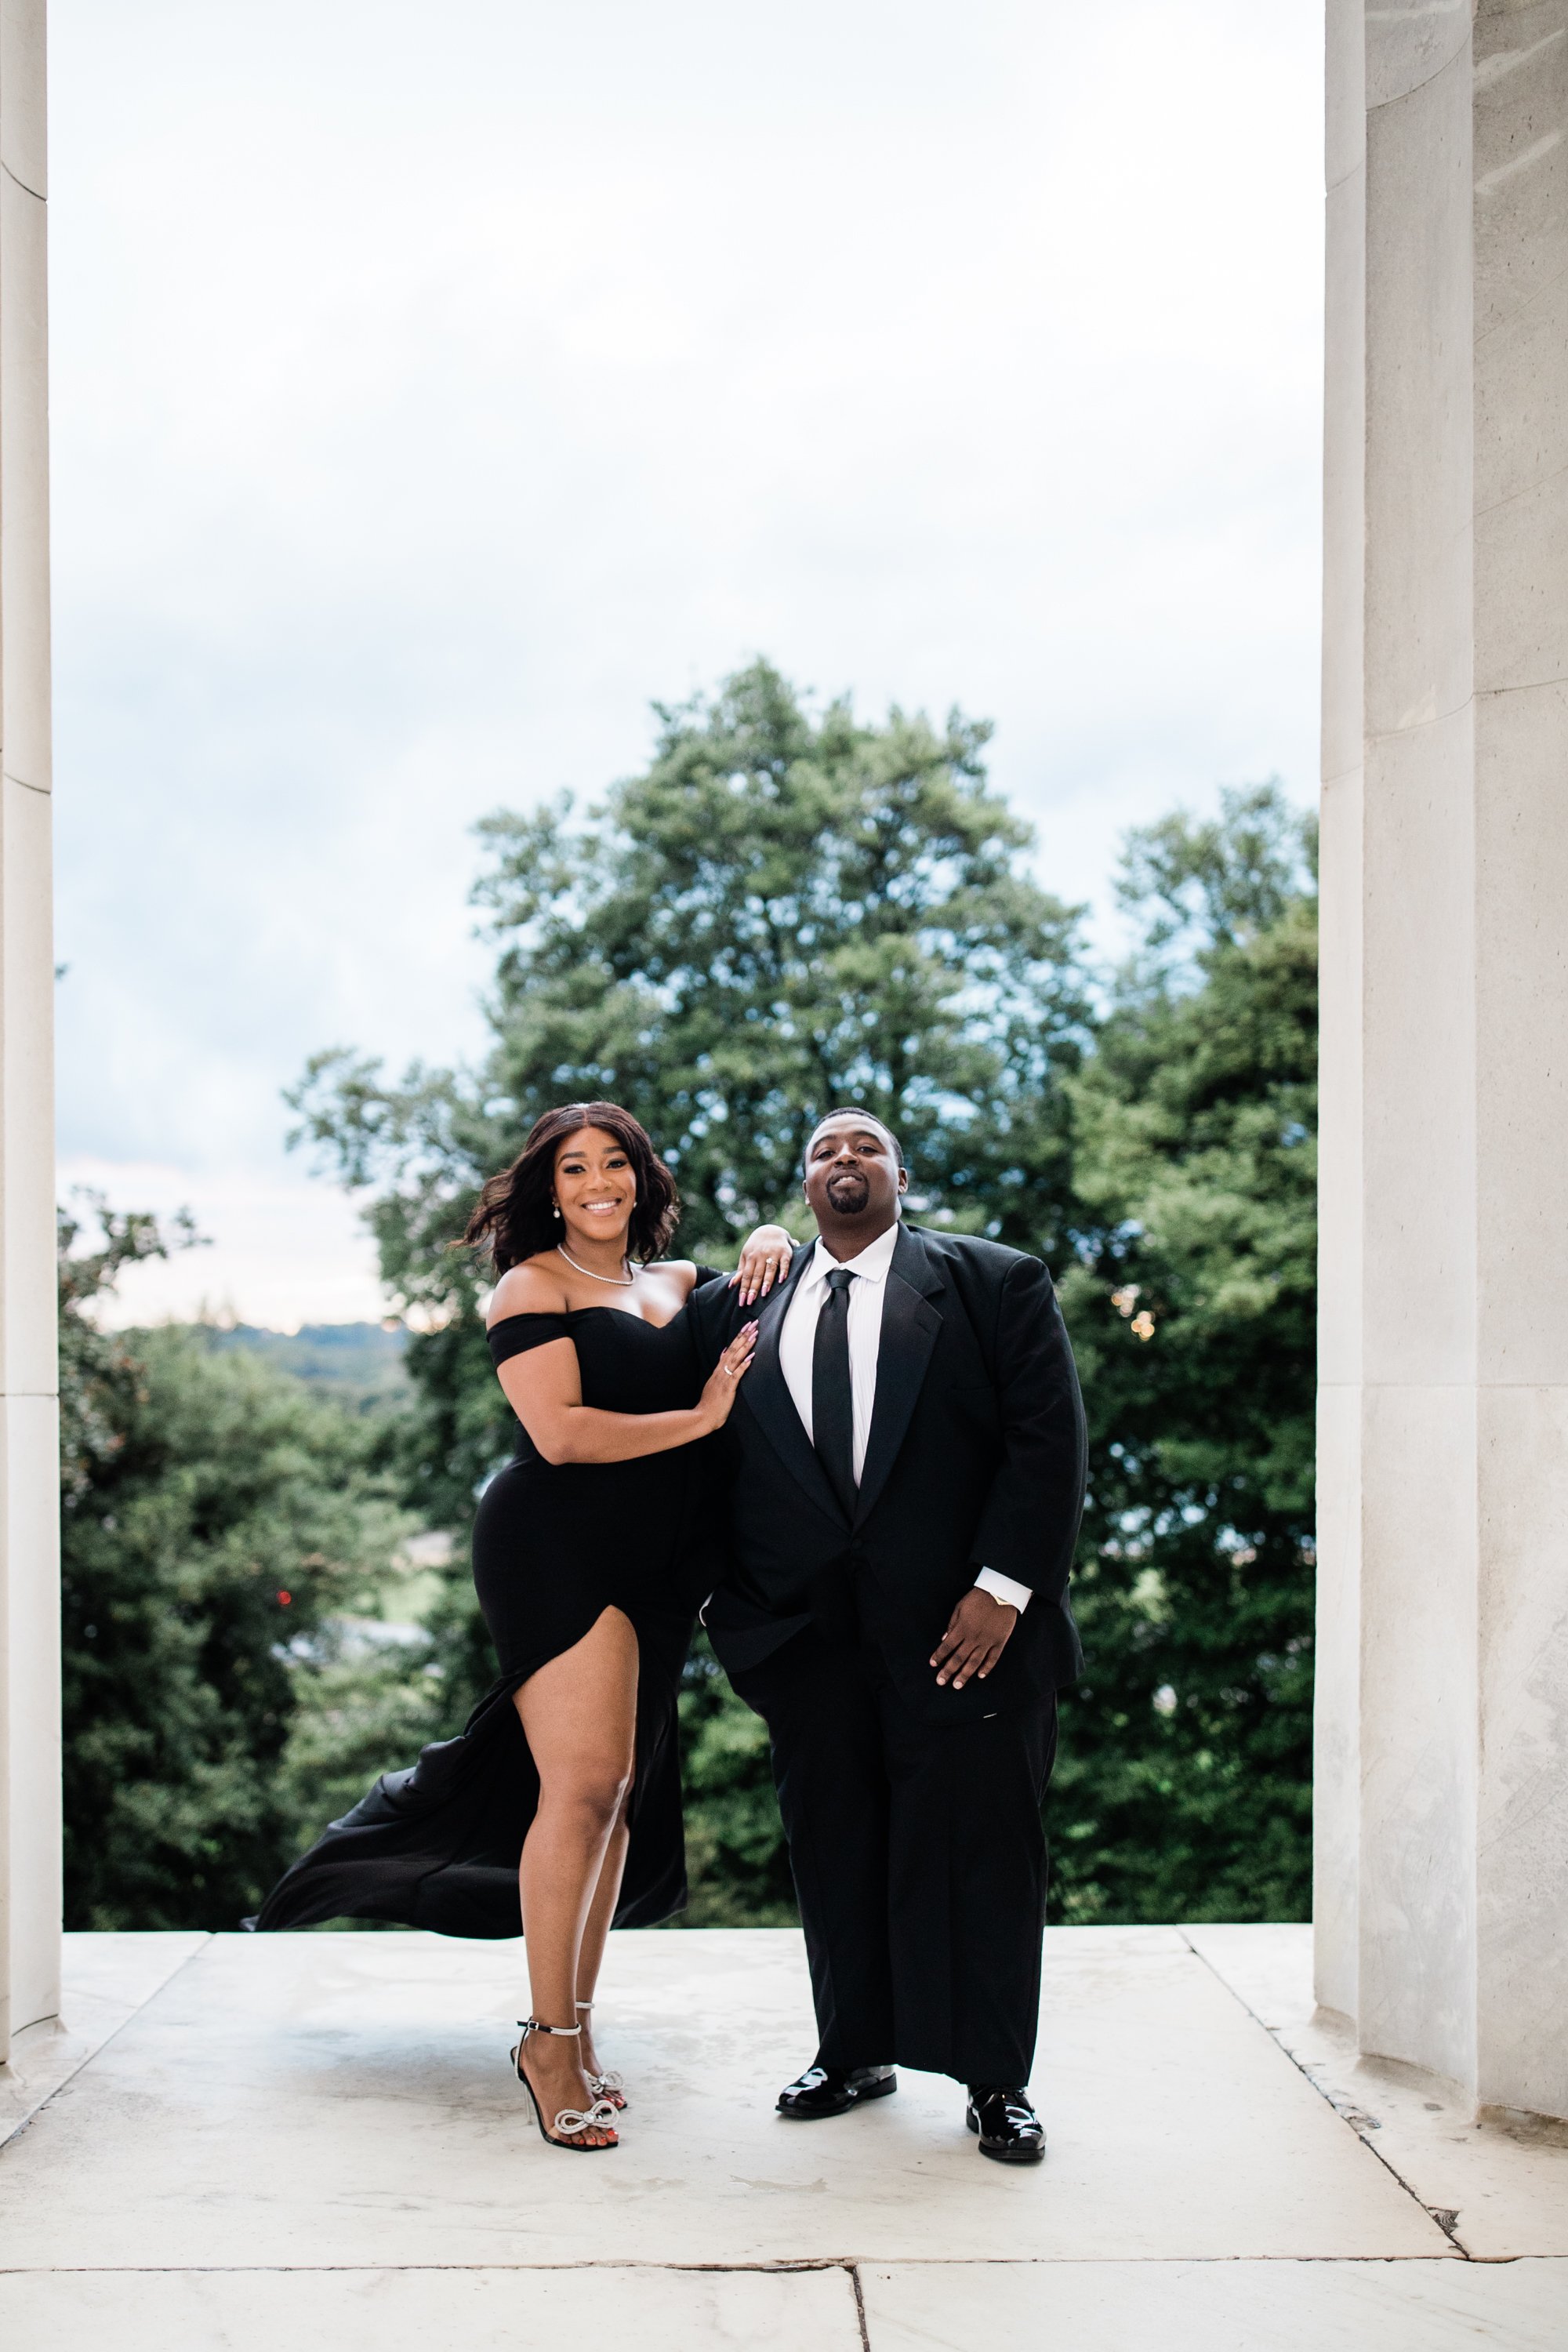 Best Black Wedding Photographers in Washington DC Megapixels Media Photography Engagement Photos at the Lincoln Memorial-38.jpg